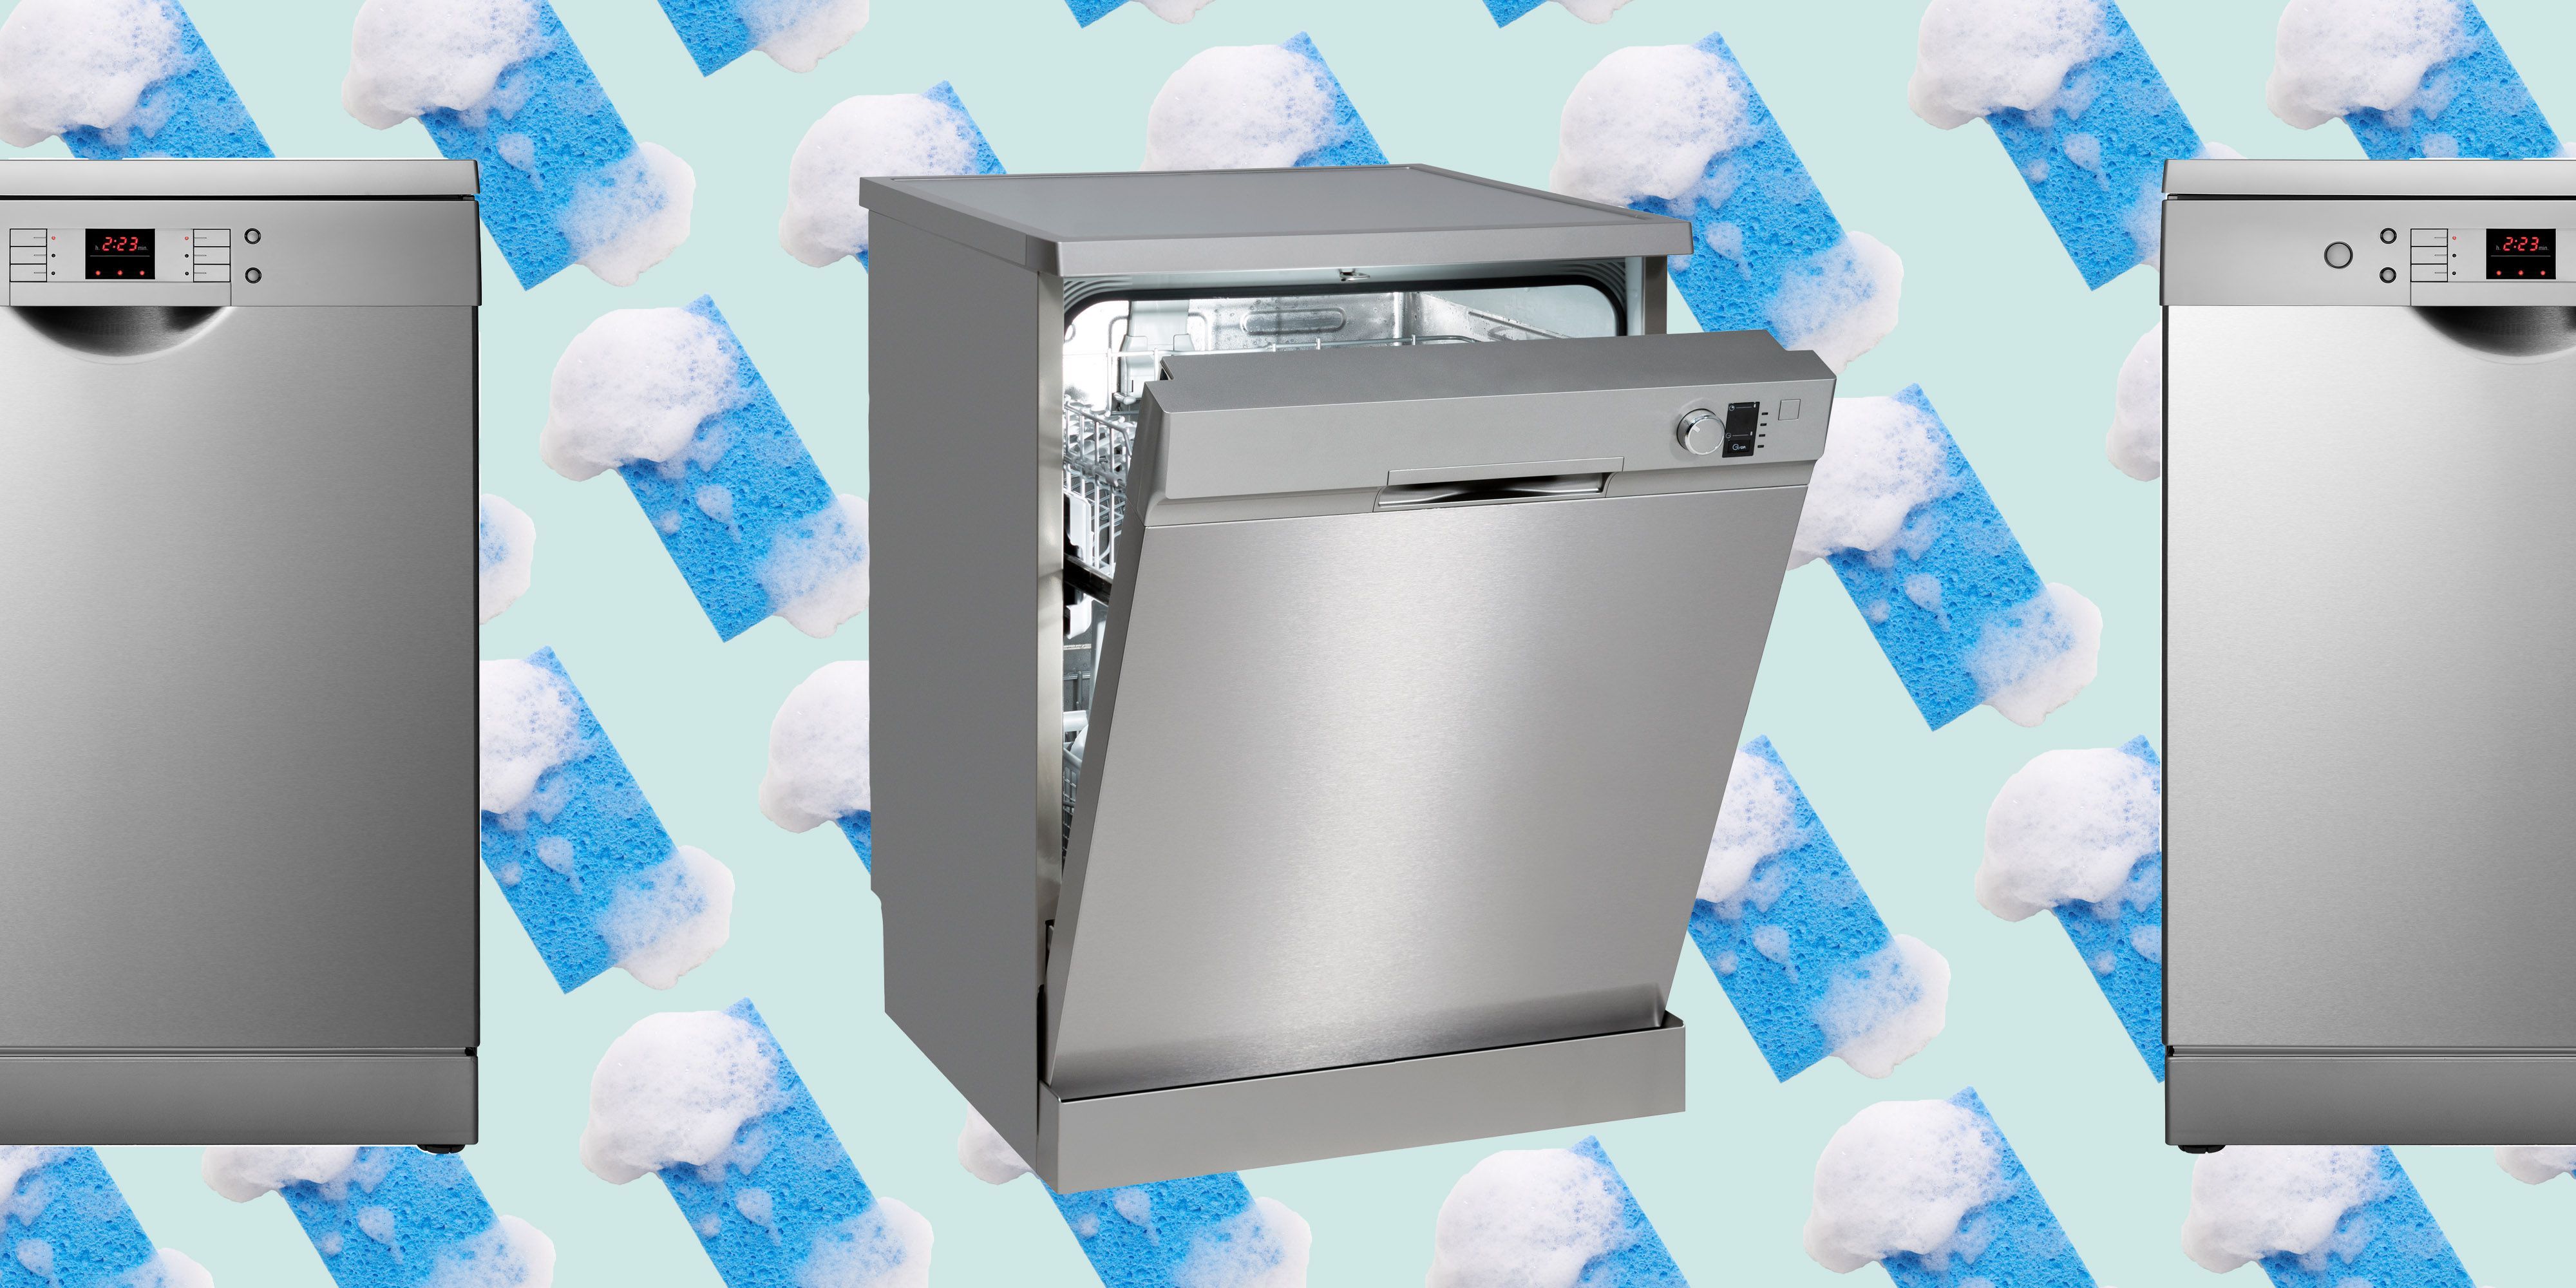 Do You Need to Clean Your Washing Machine and Dishwasher?